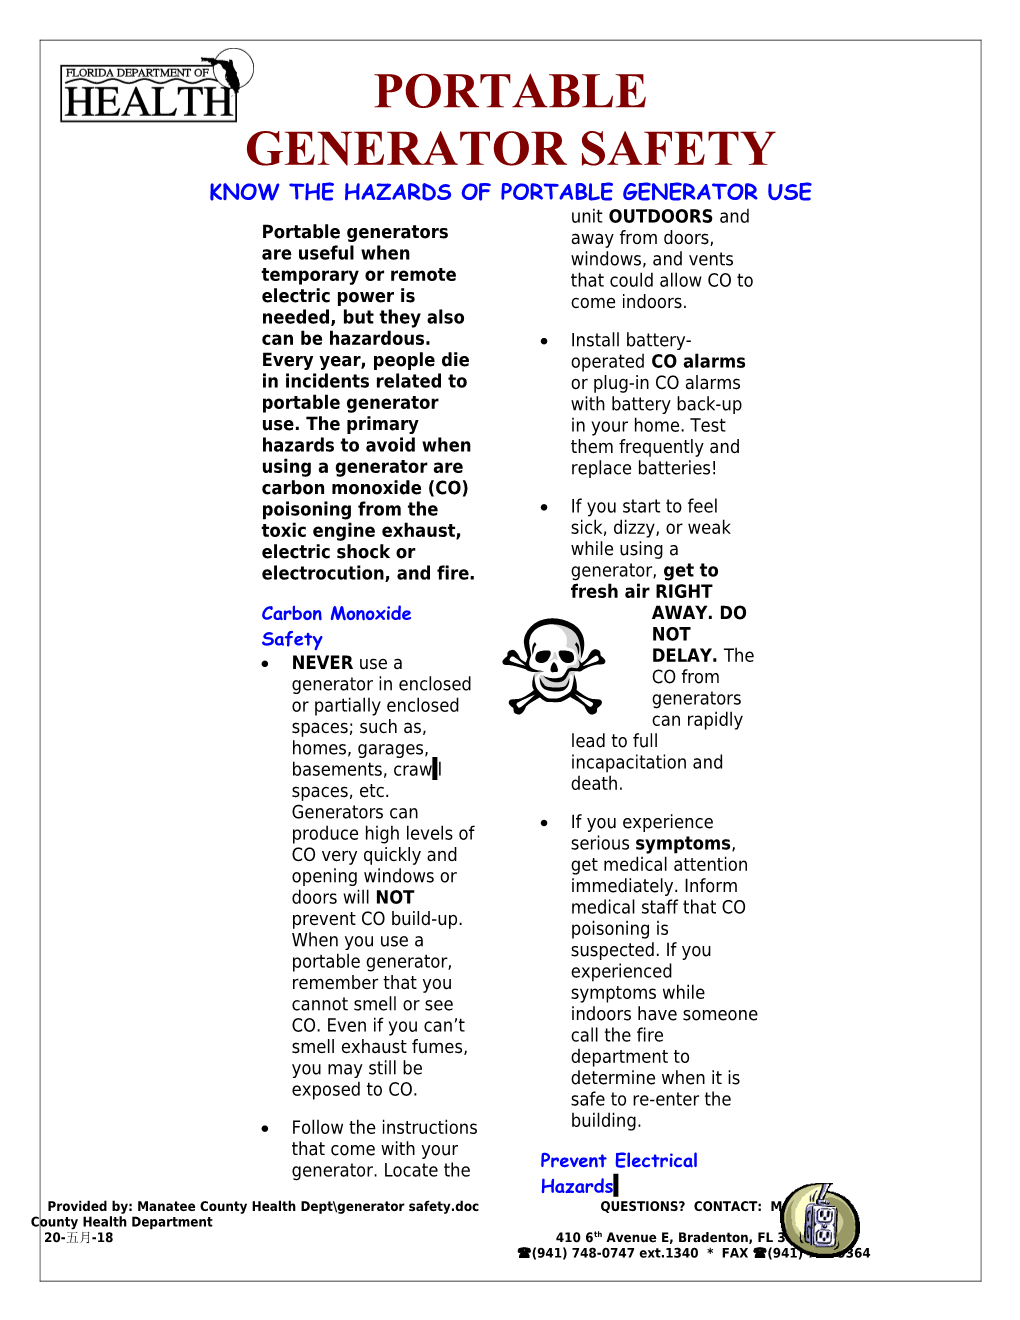 Know the Hazards of Portable Generator Use